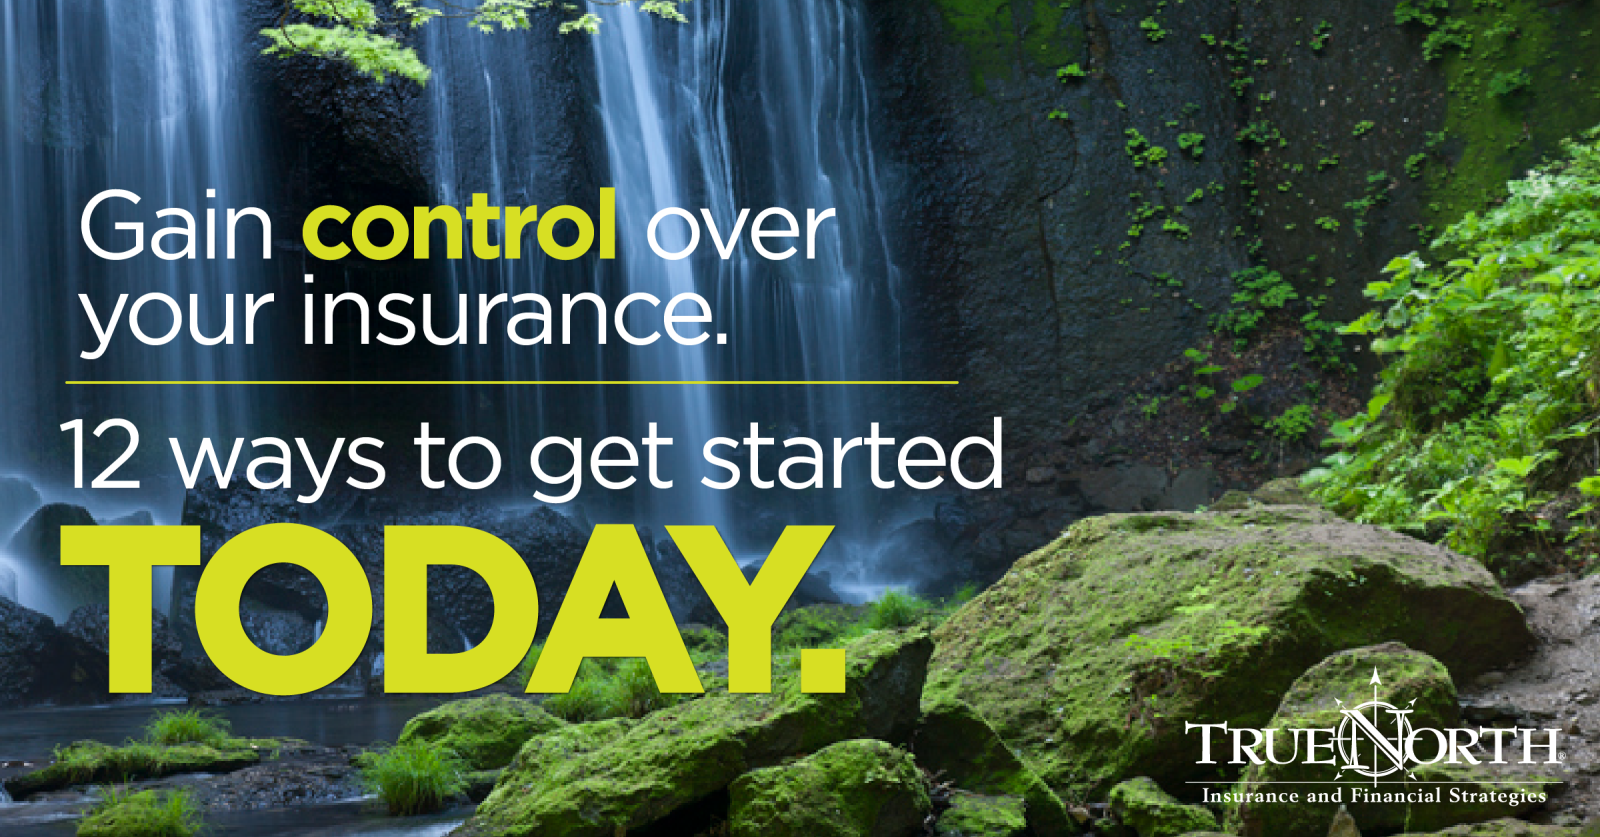 Gain control over your insurance